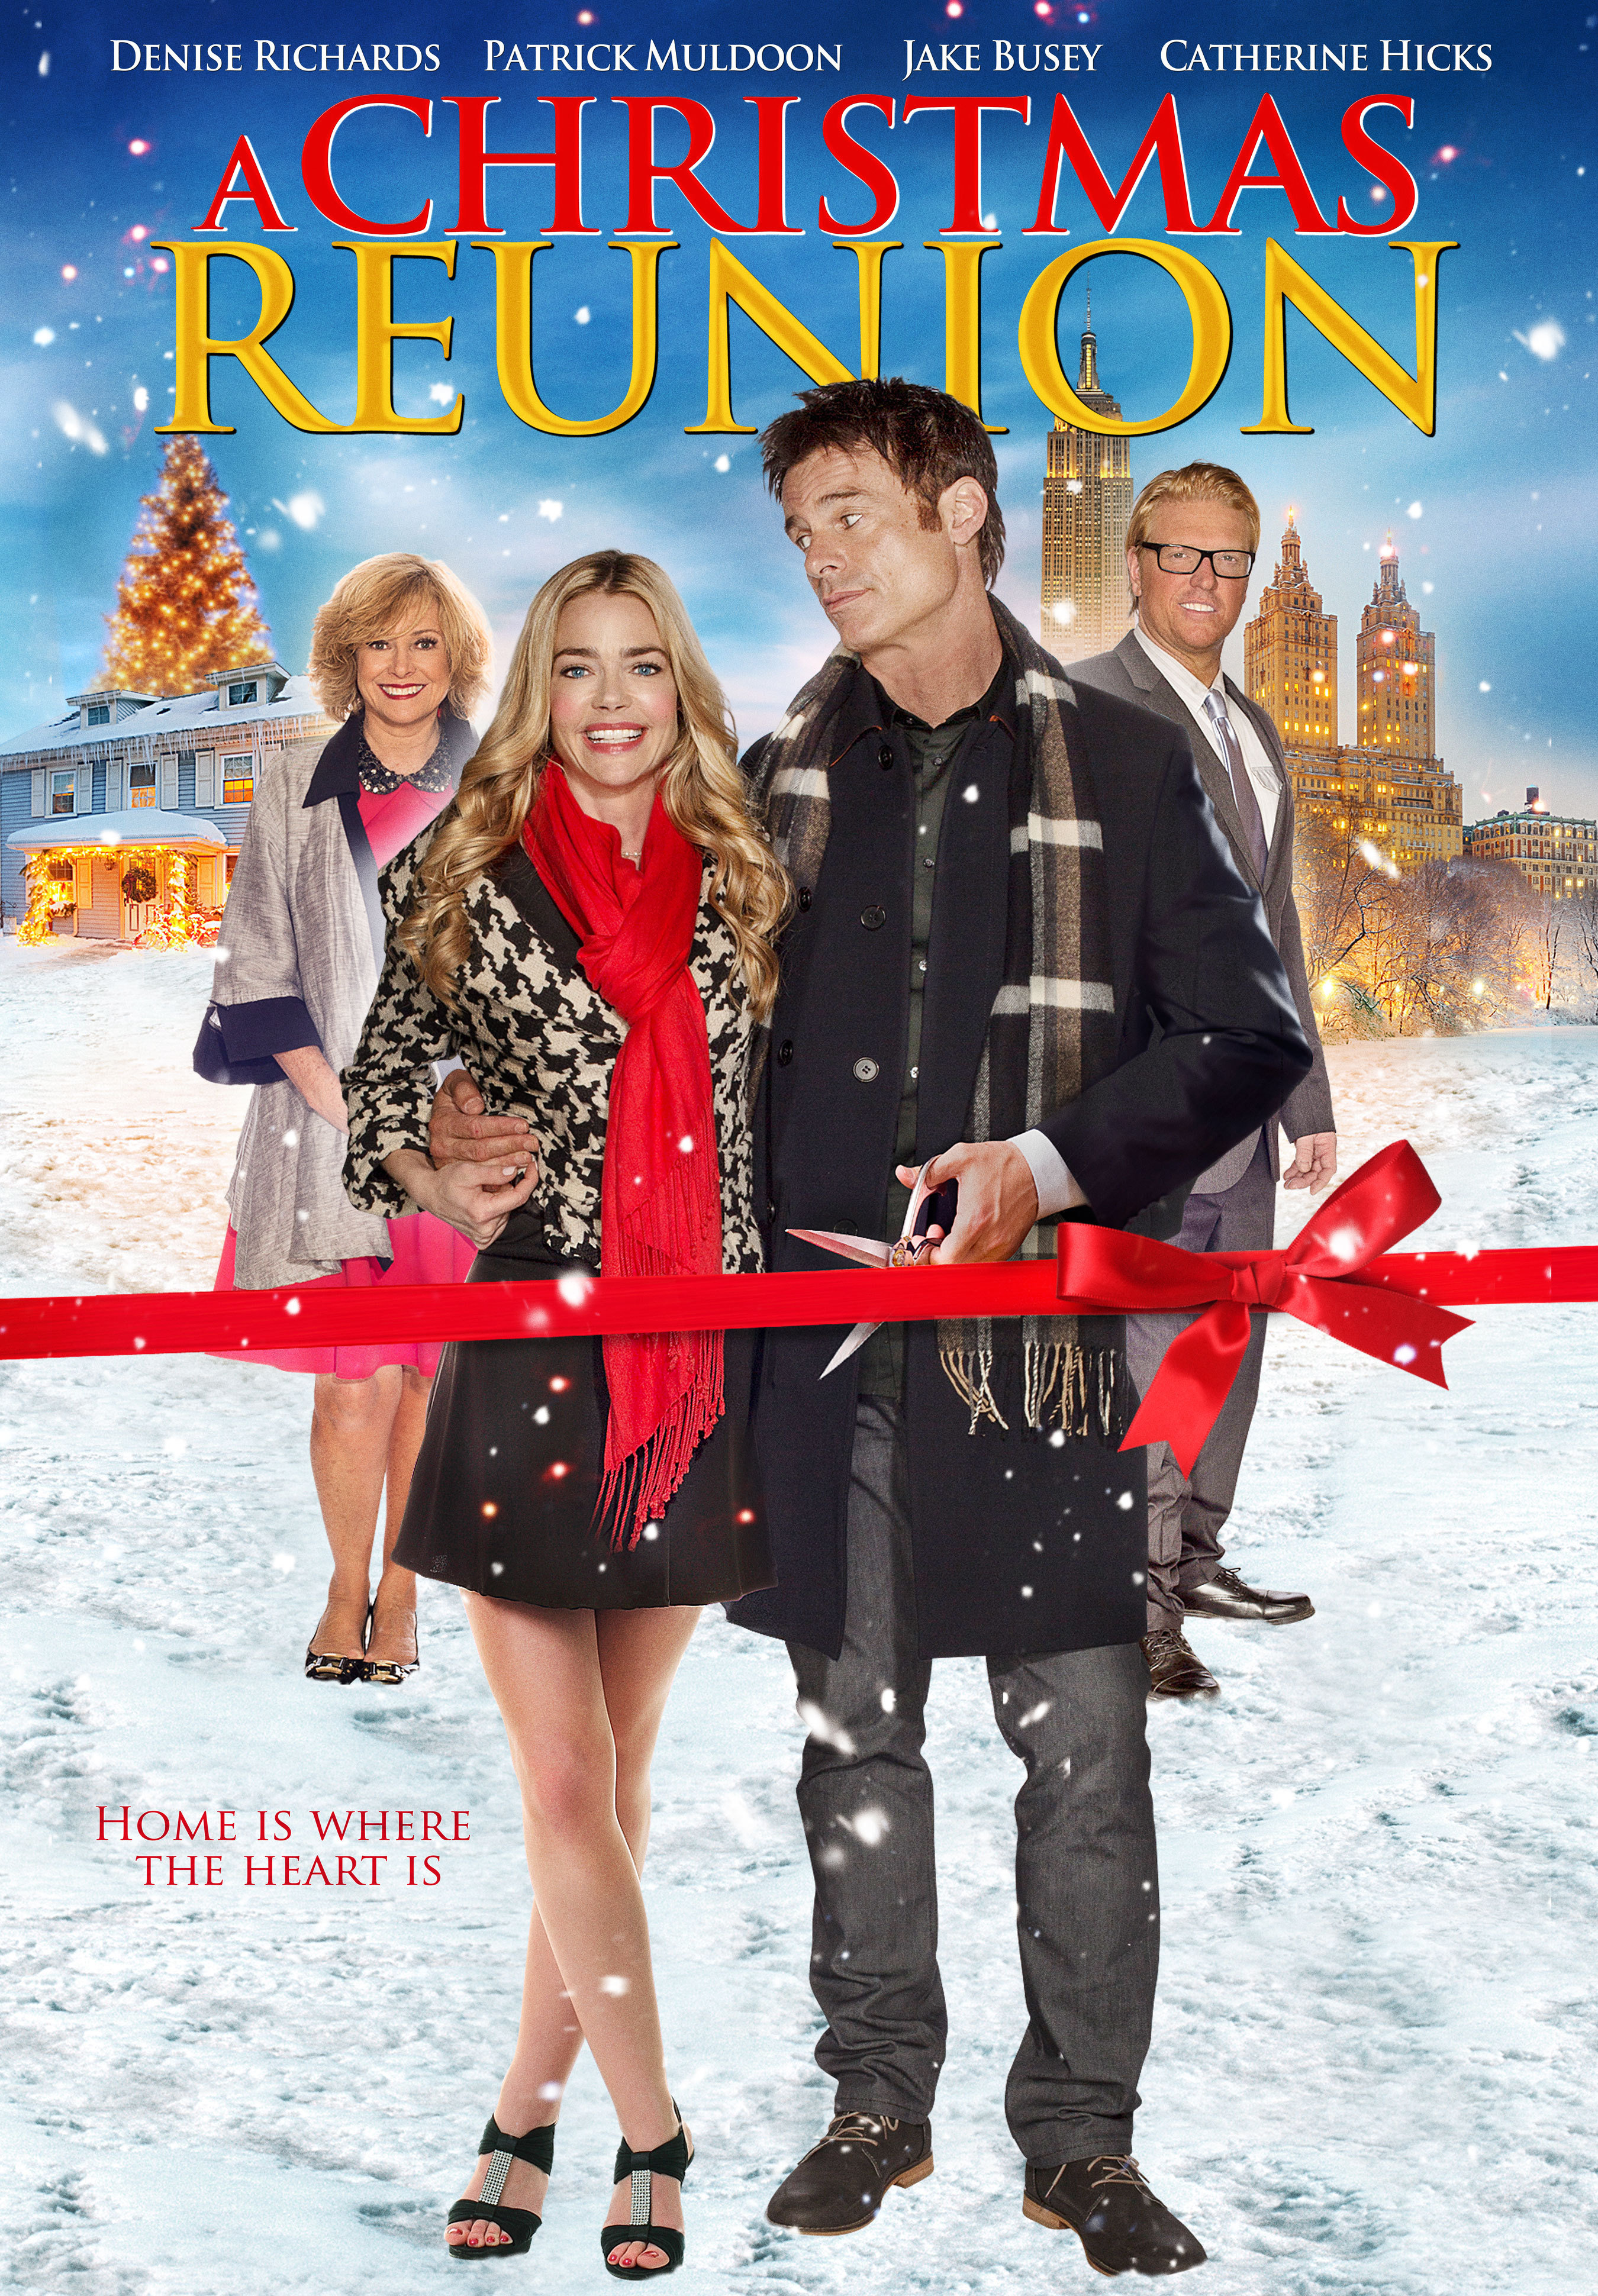 Denise Richards, Jake Busey, Patrick Muldoon and Catherine Hicks in A Christmas Reunion (2015)